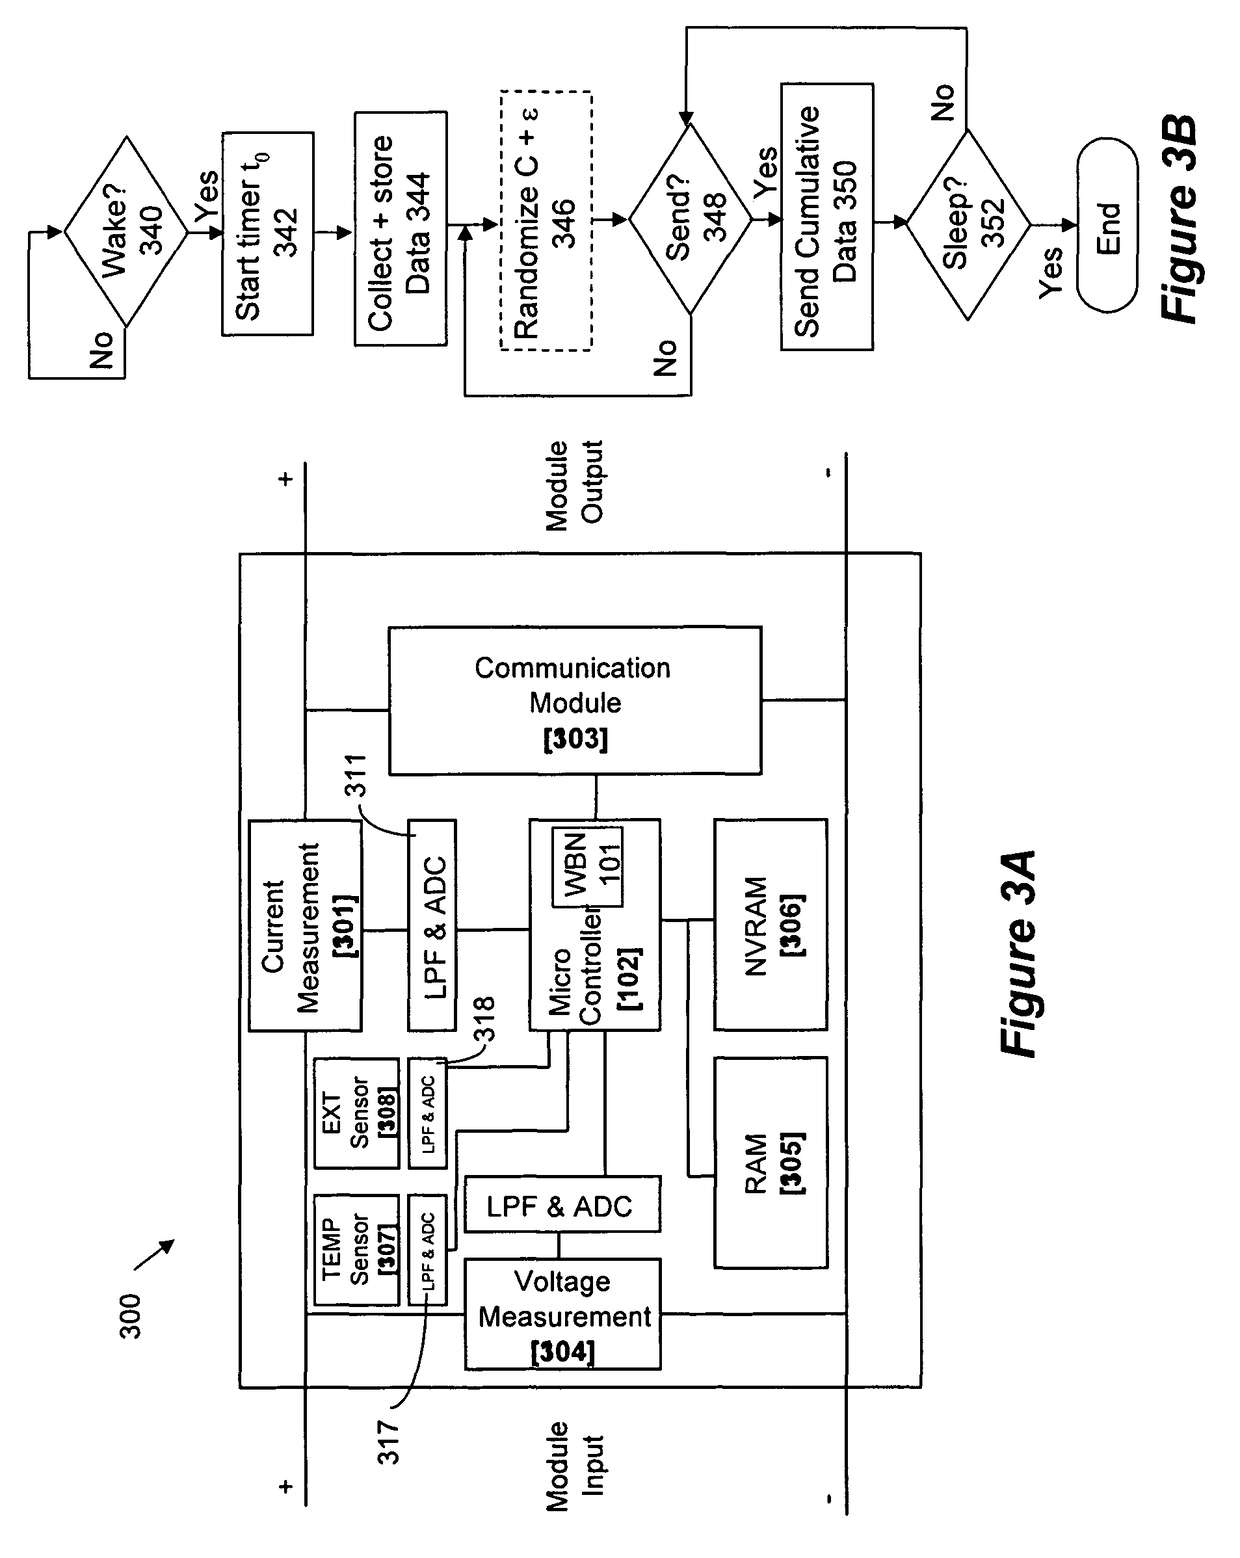 Monitoring of distributed power harvesting systems using DC power sources